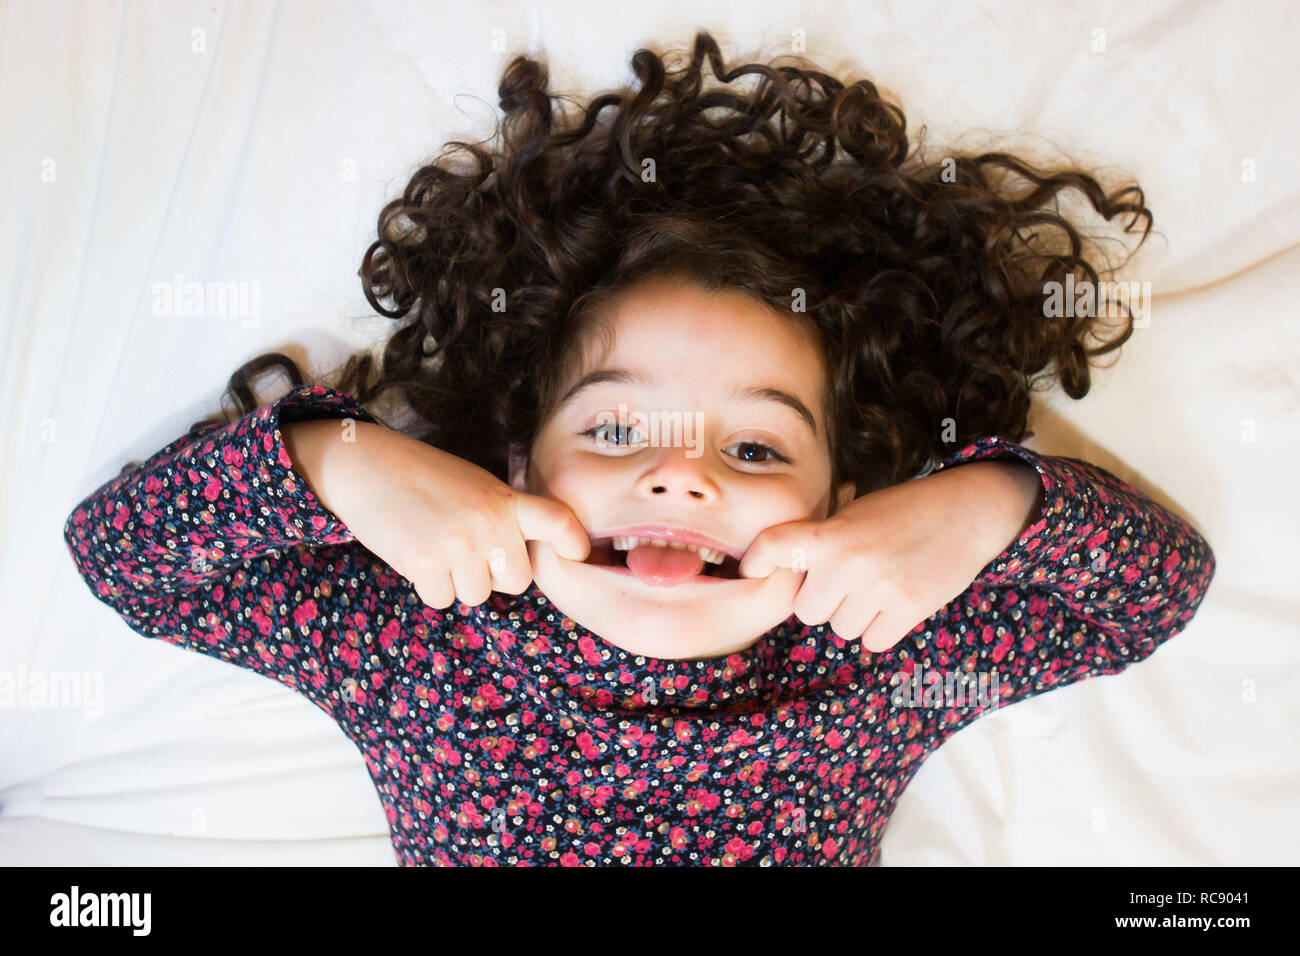 Curly haired girl makes goofy face Stock Photo